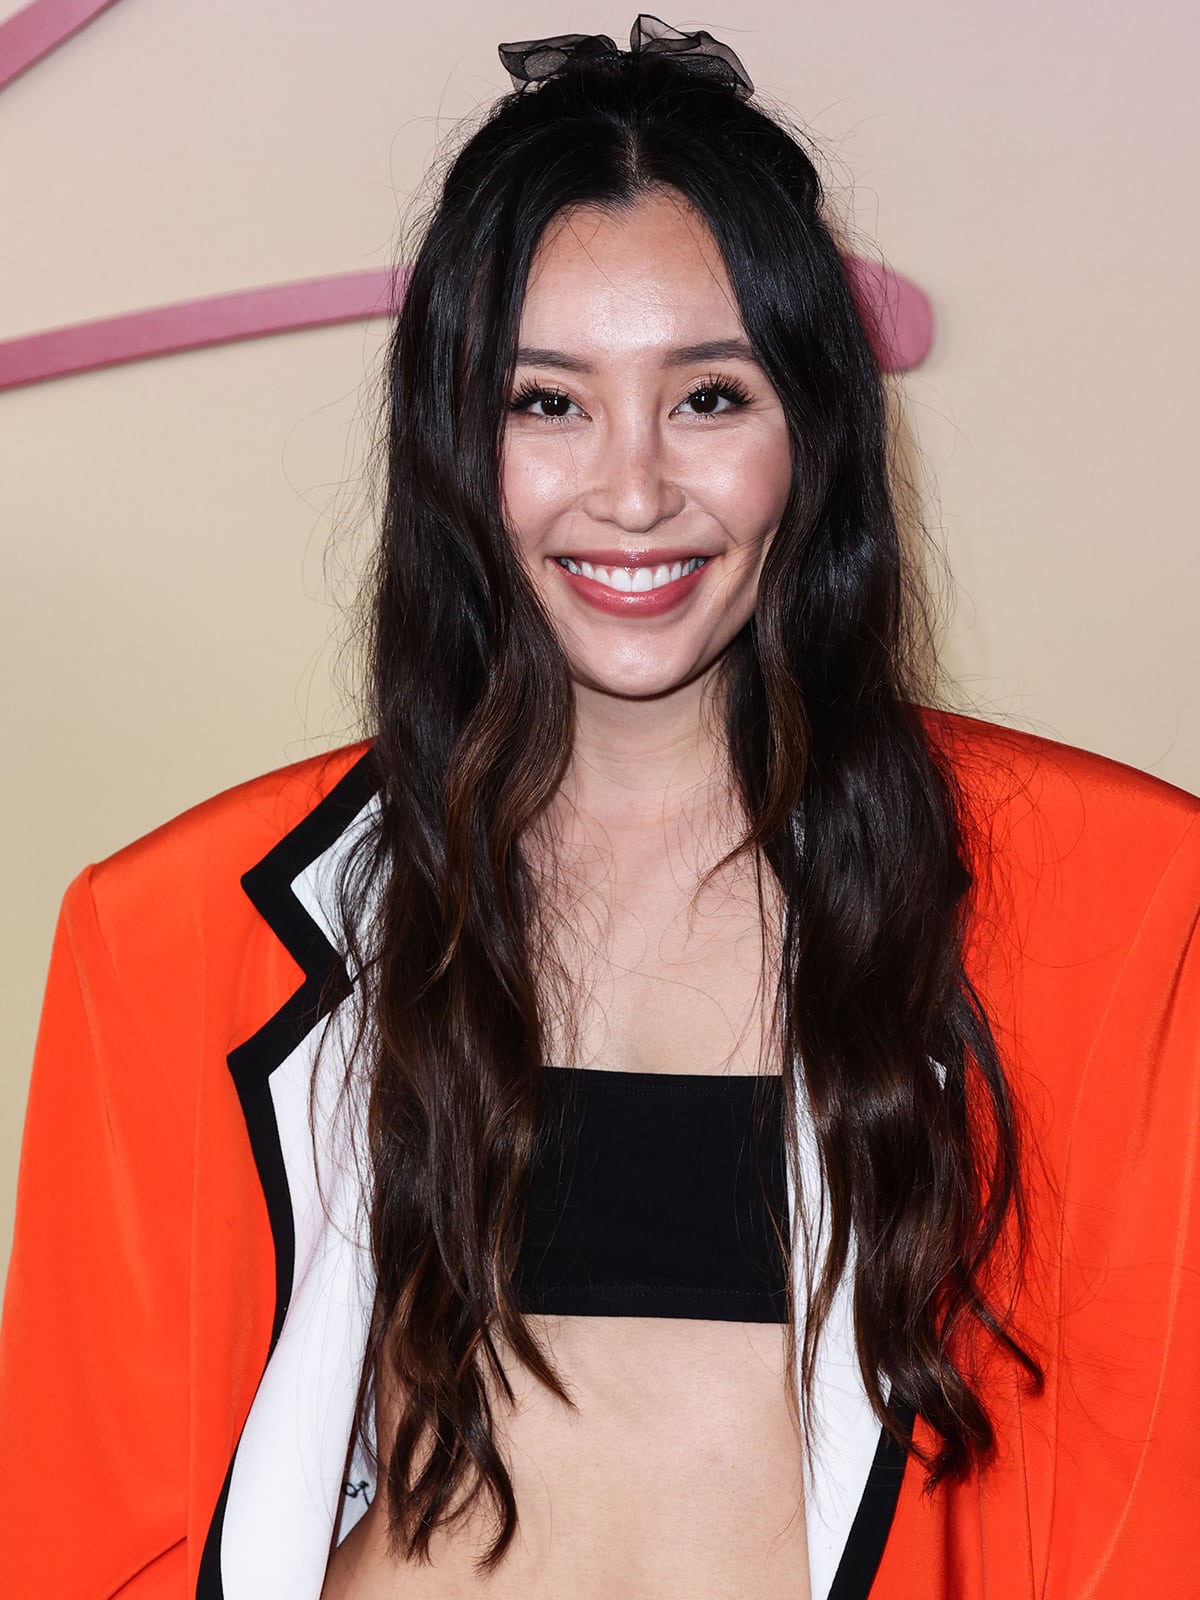 Olivia Sui wears fake lashes and styles her long tresses in a wavy half-up hairstyle with a chiffon bow